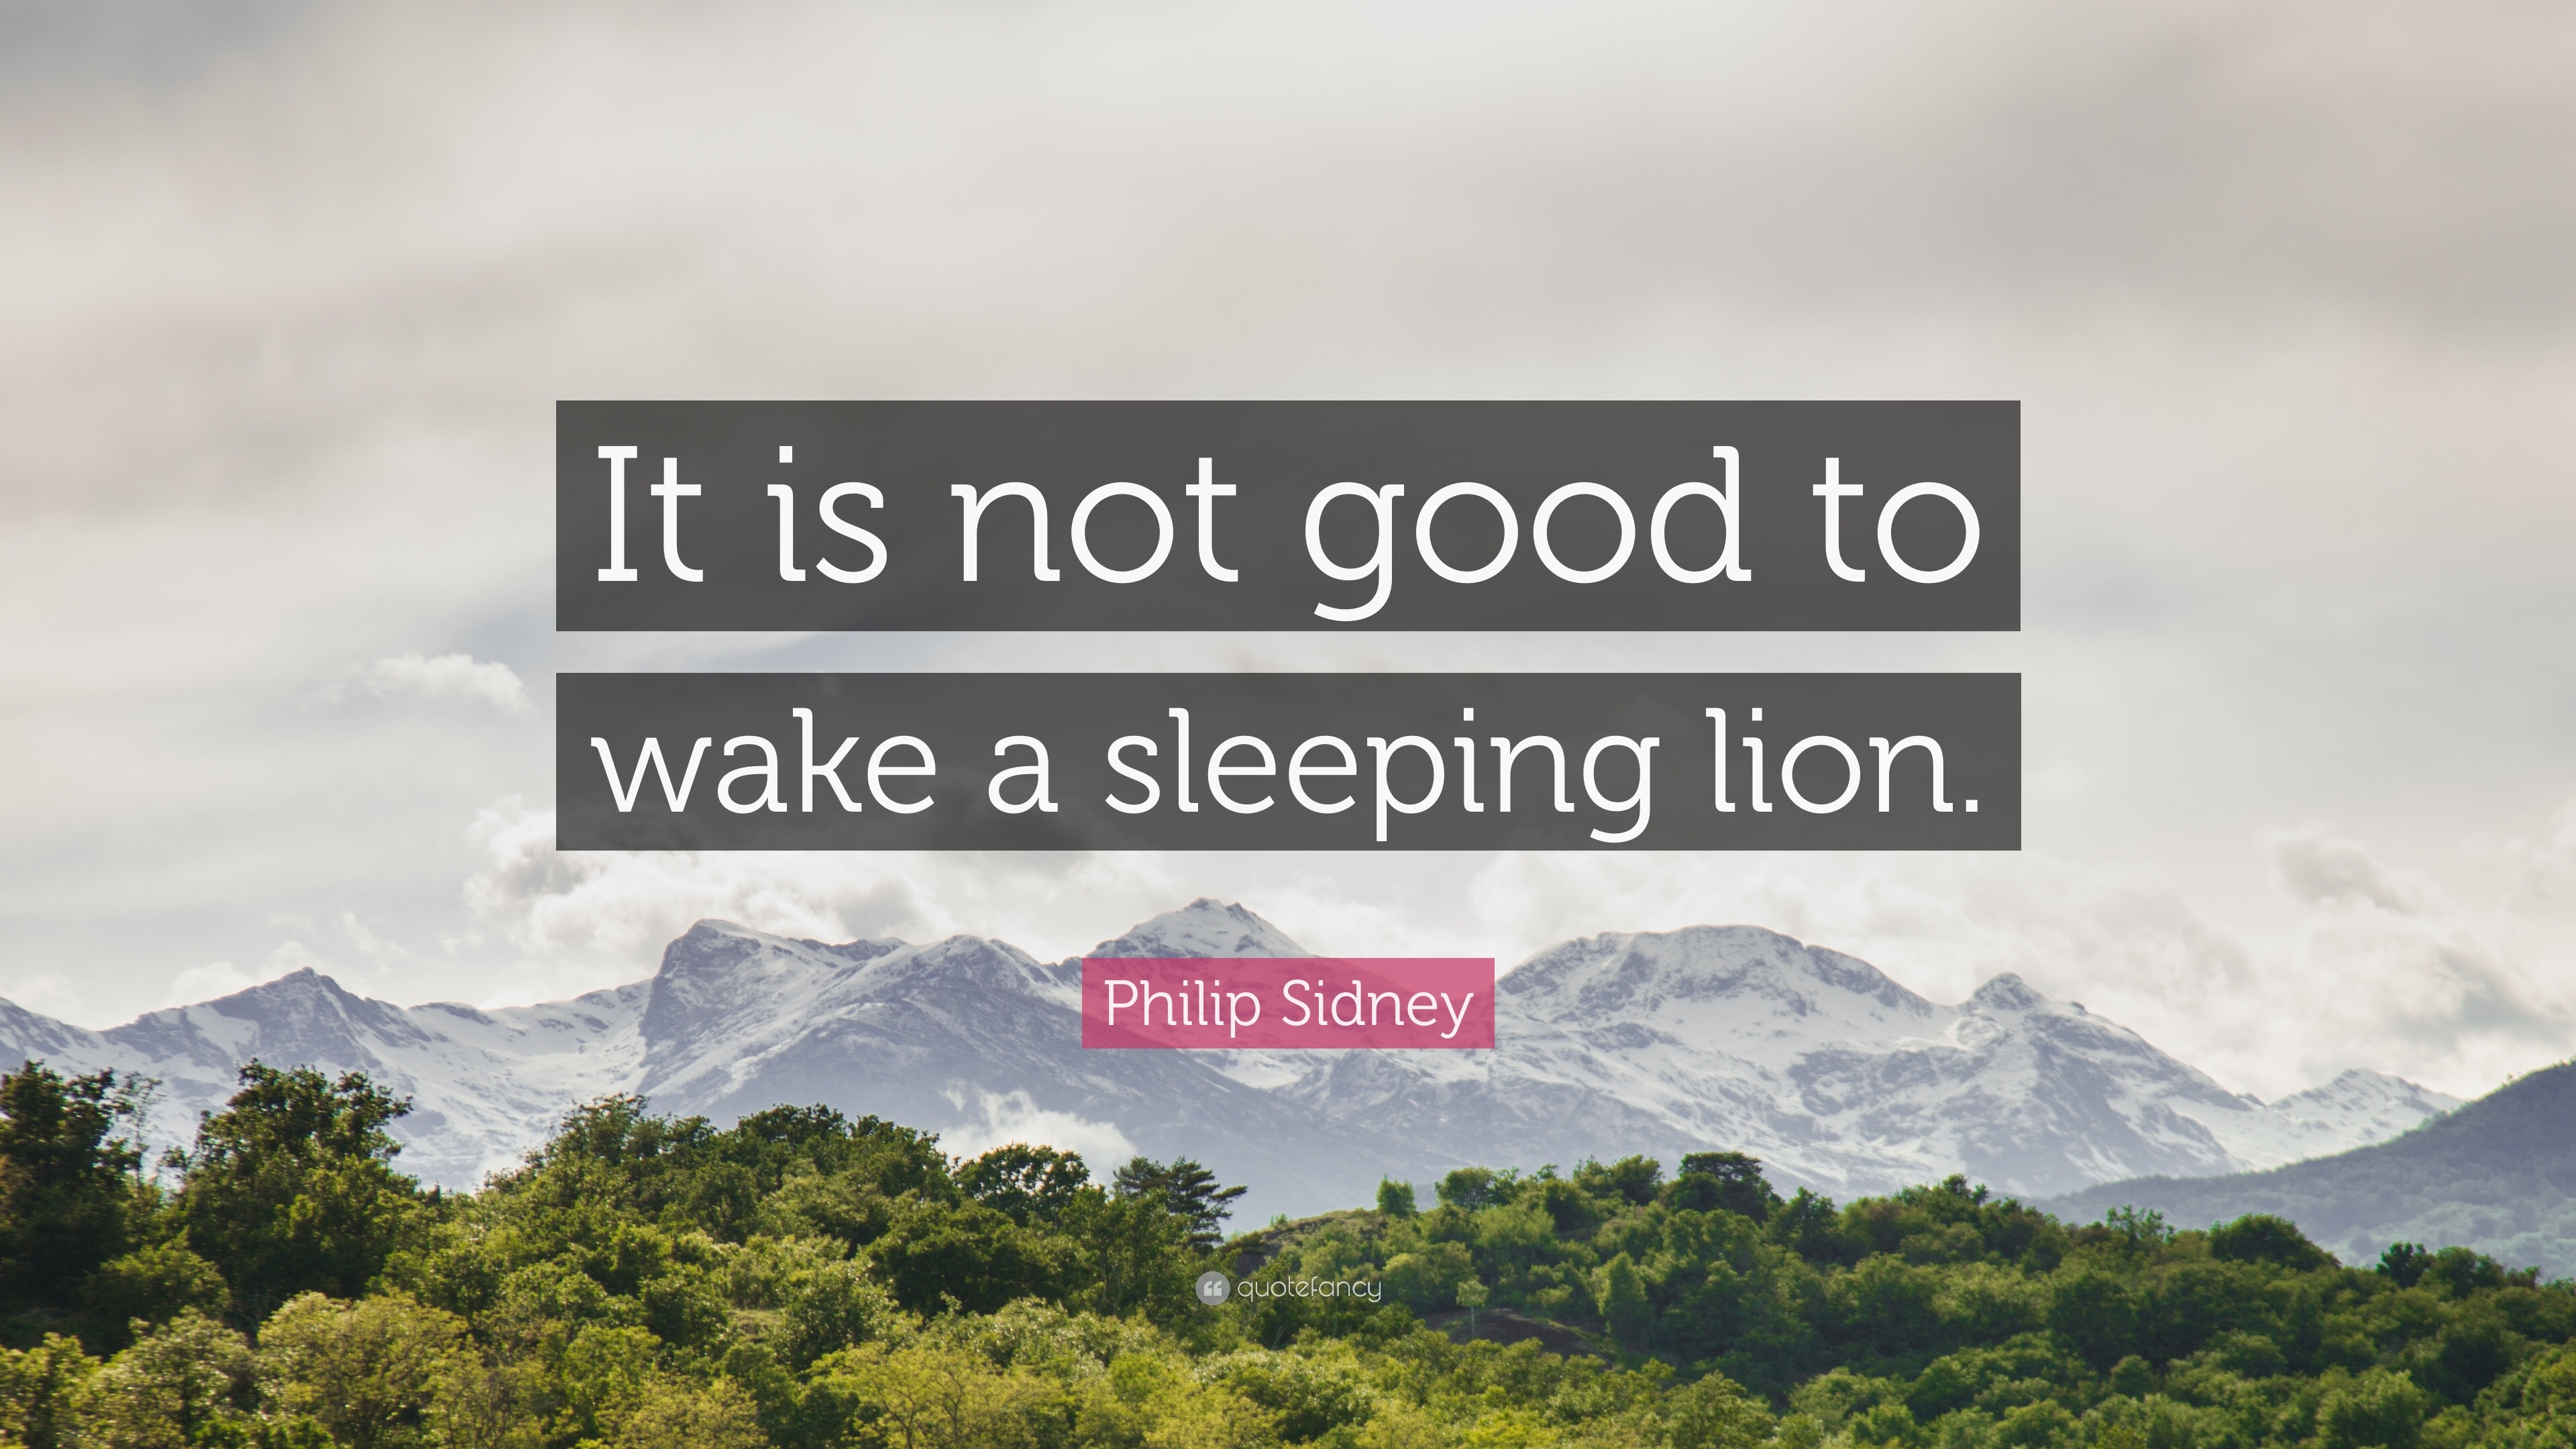 Wake Not A Sleeping Lion Philip Sidney Quote: “It is not good to wake a sleeping lion.”